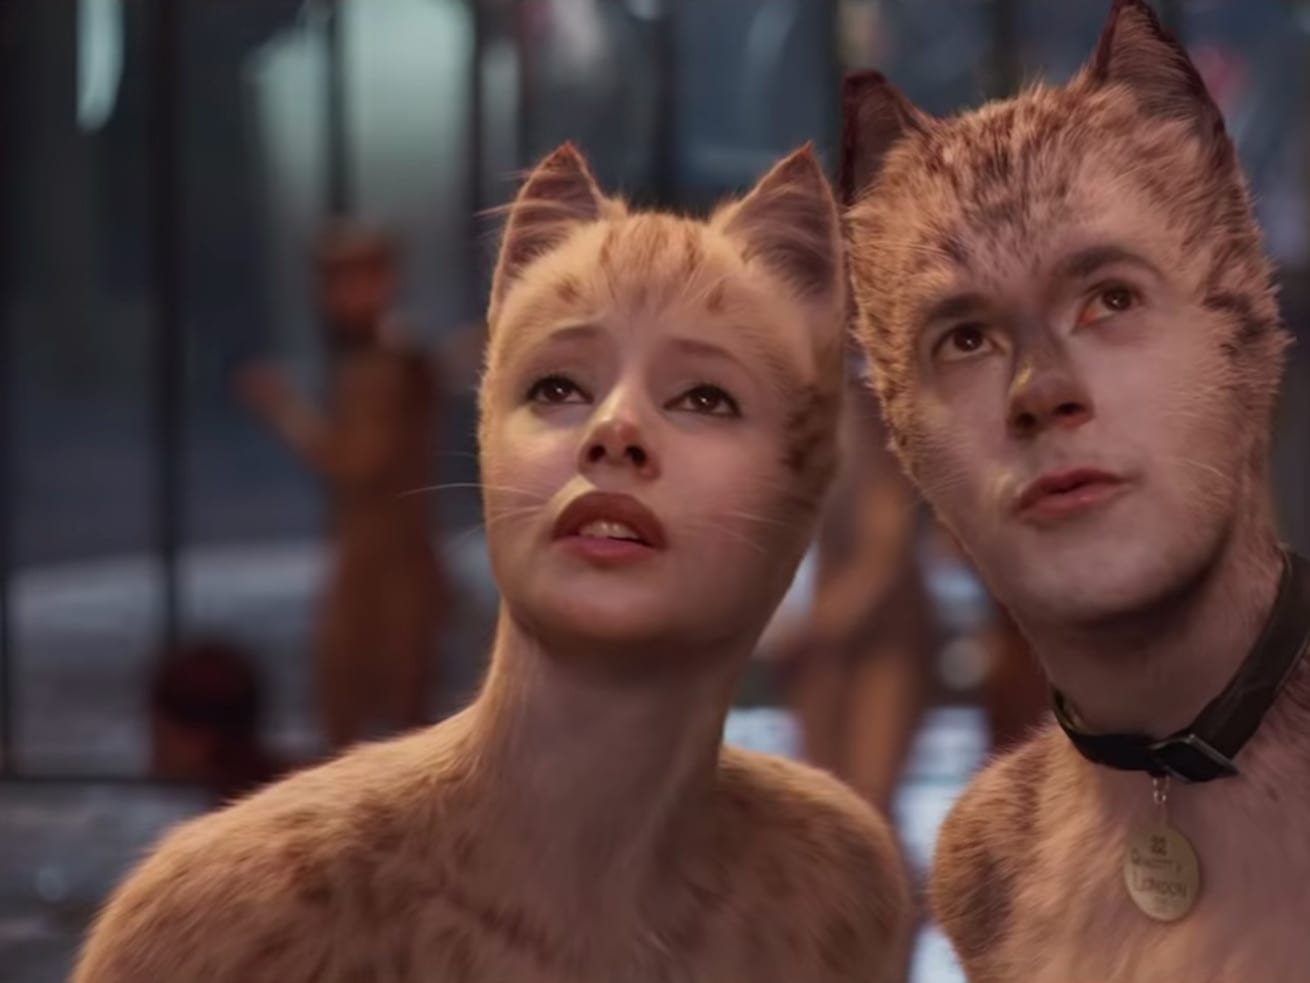 Taylor Swift’s “Beautiful Ghosts” might be the best part of the Cats movie